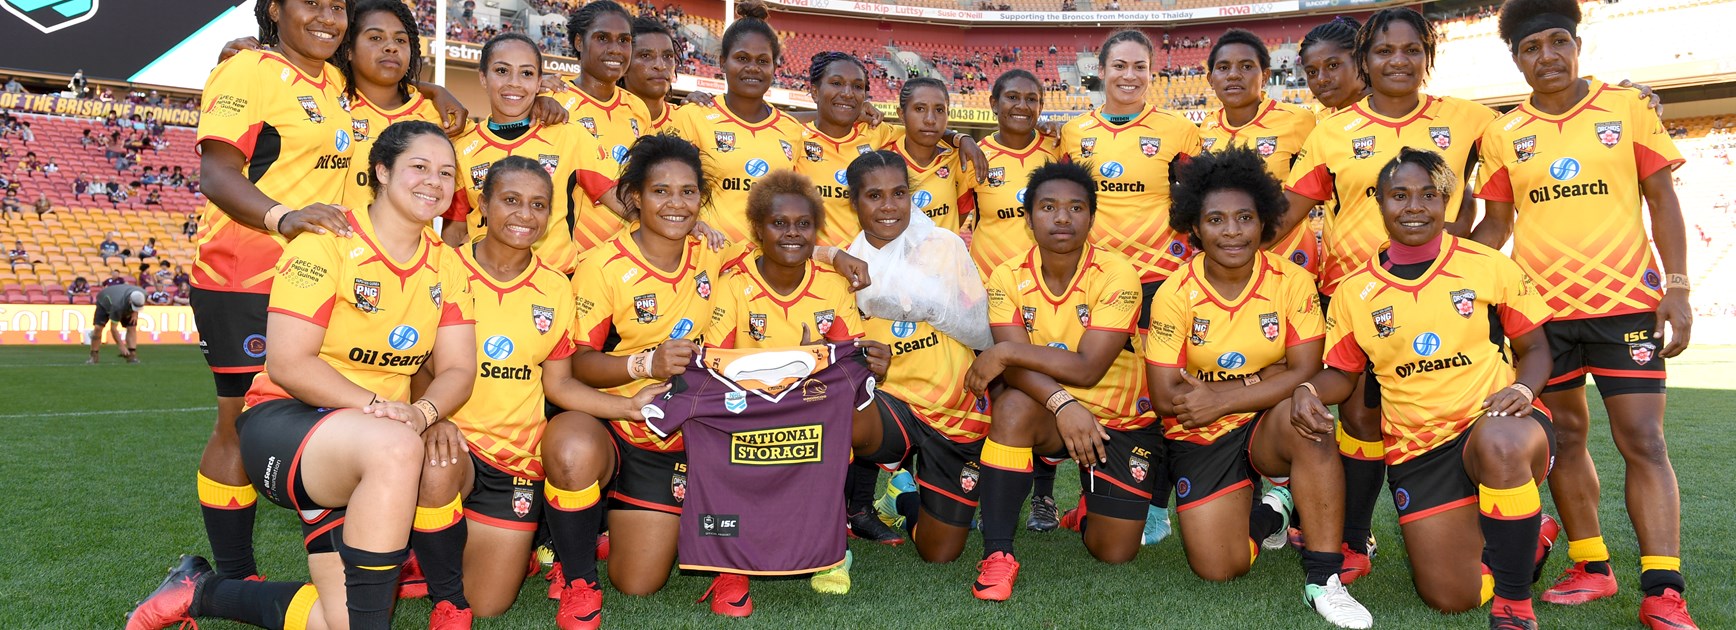 PNG Orchids named to face Australian Women's team